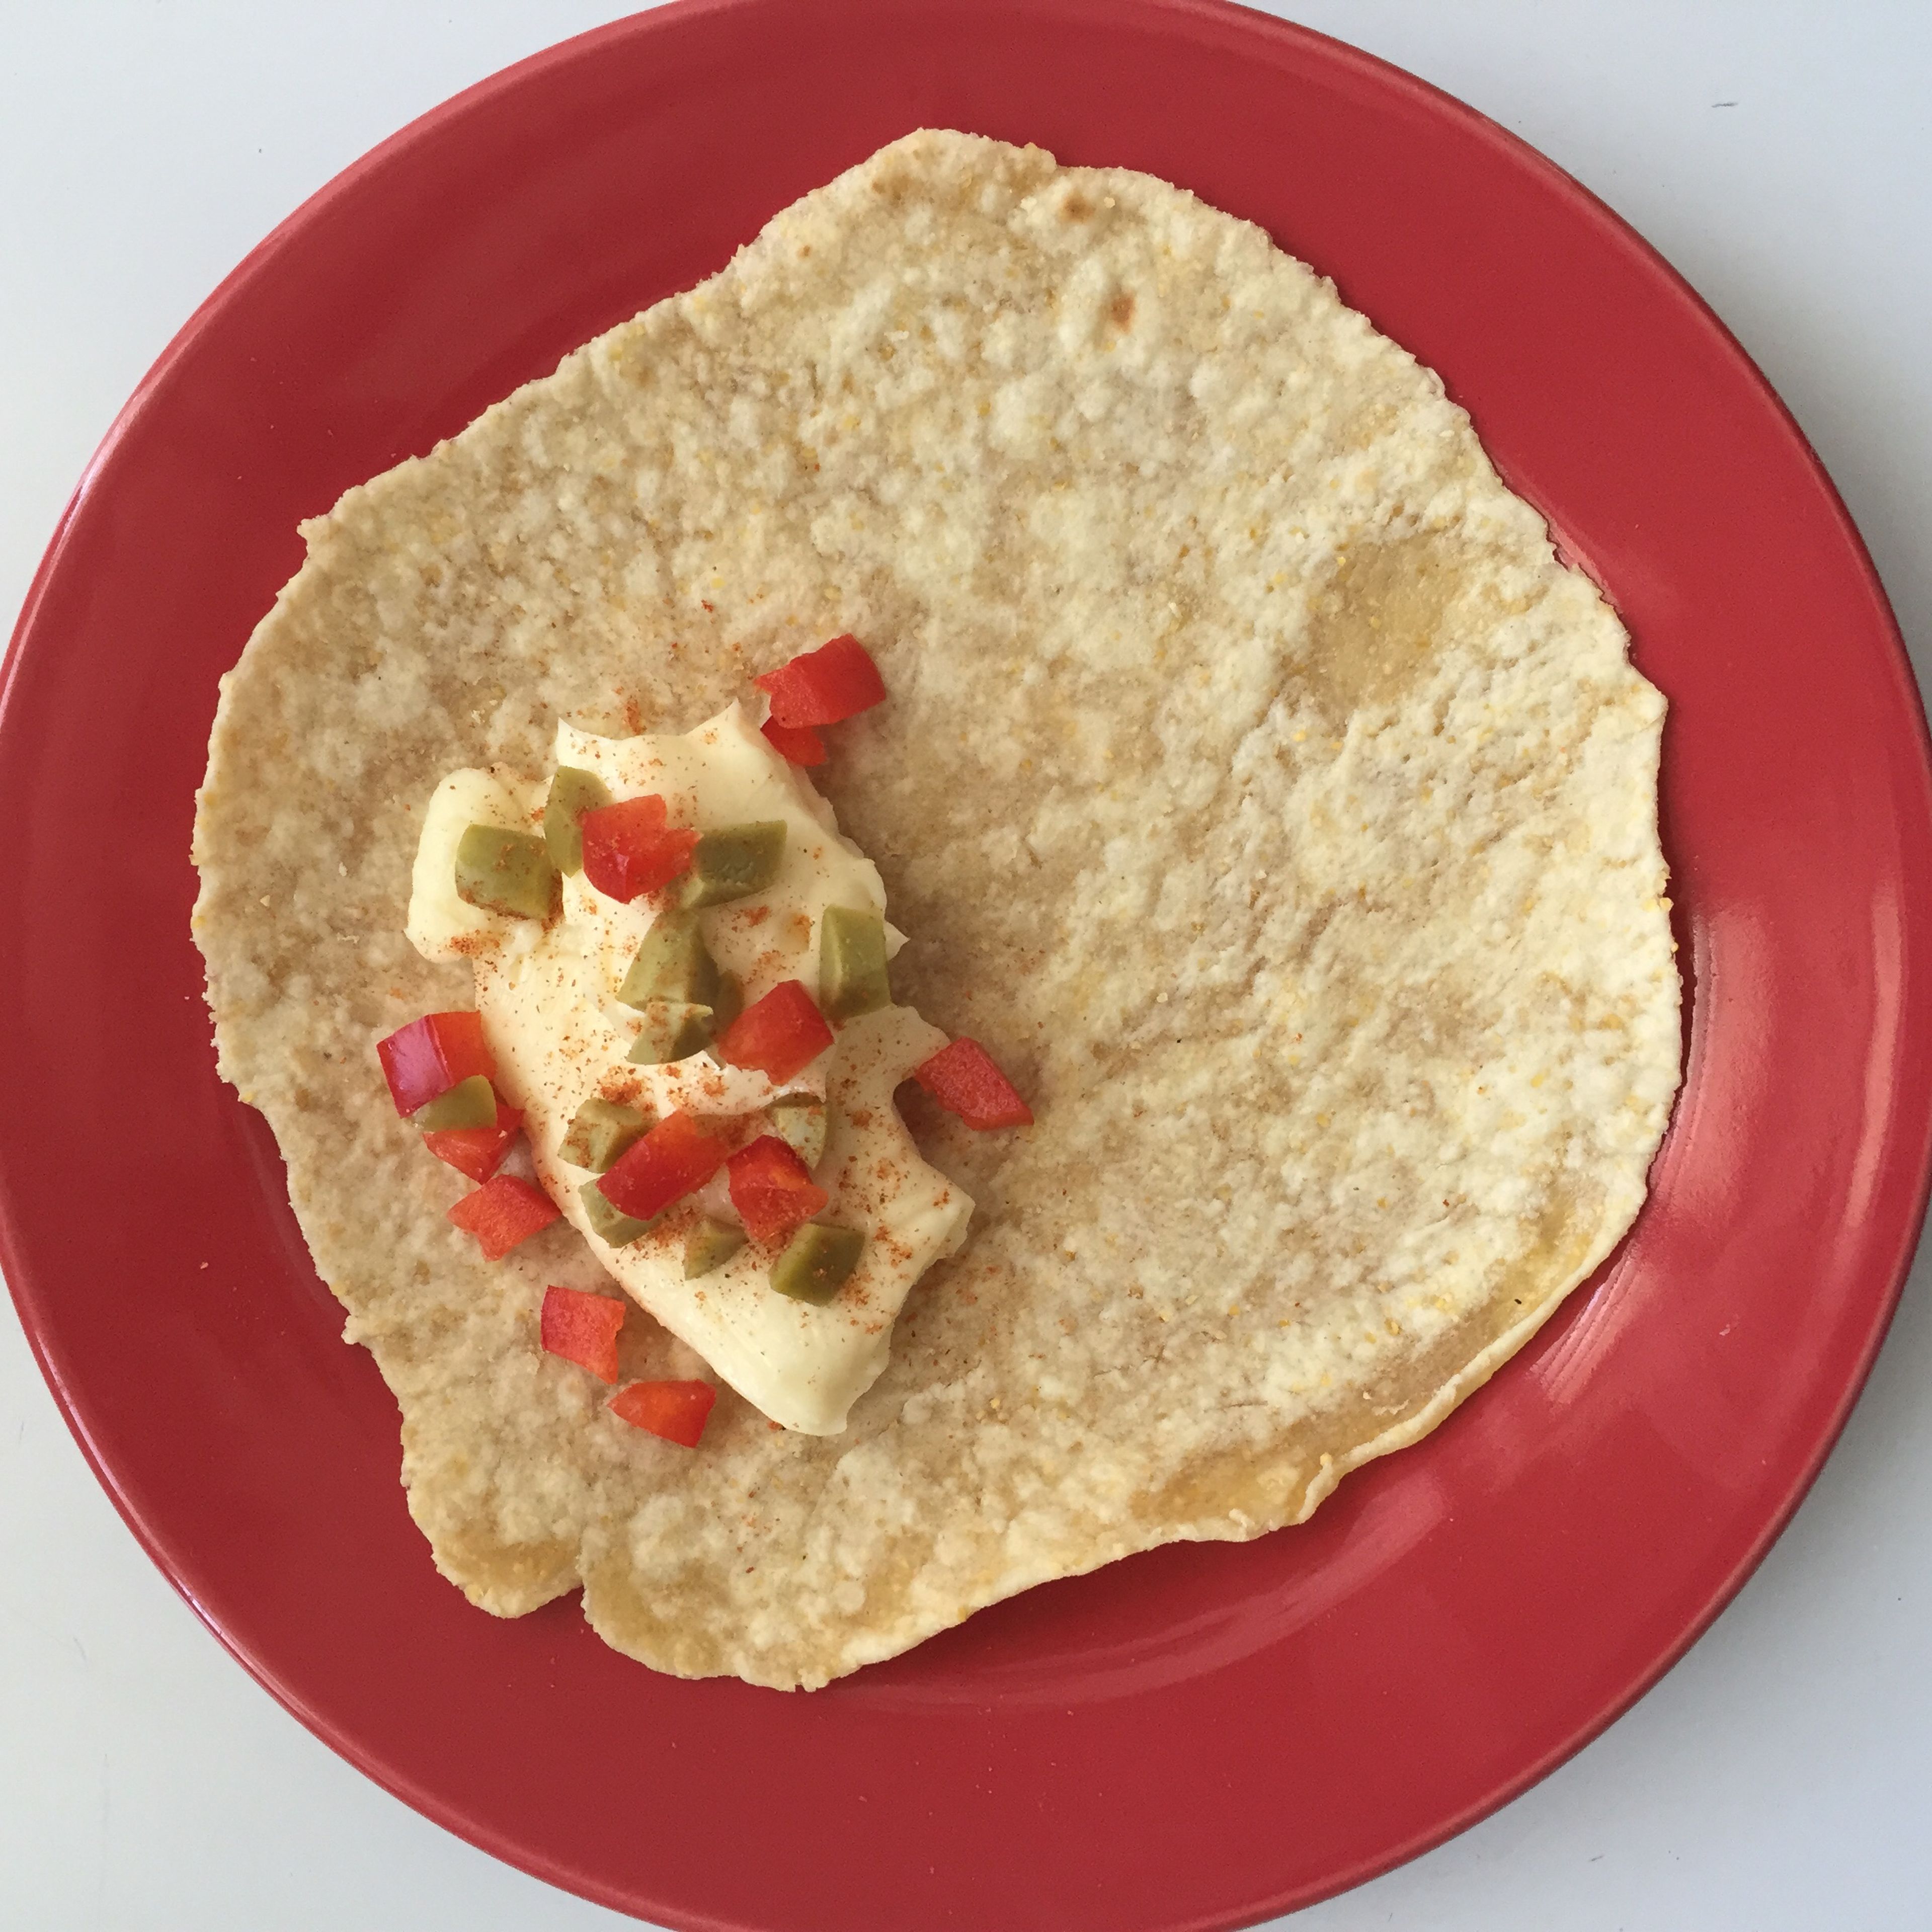 Place corn tortilla over a dish, and add loaf of cheese, diced red bell pepper, diced onions and cayenne pepper to taste.